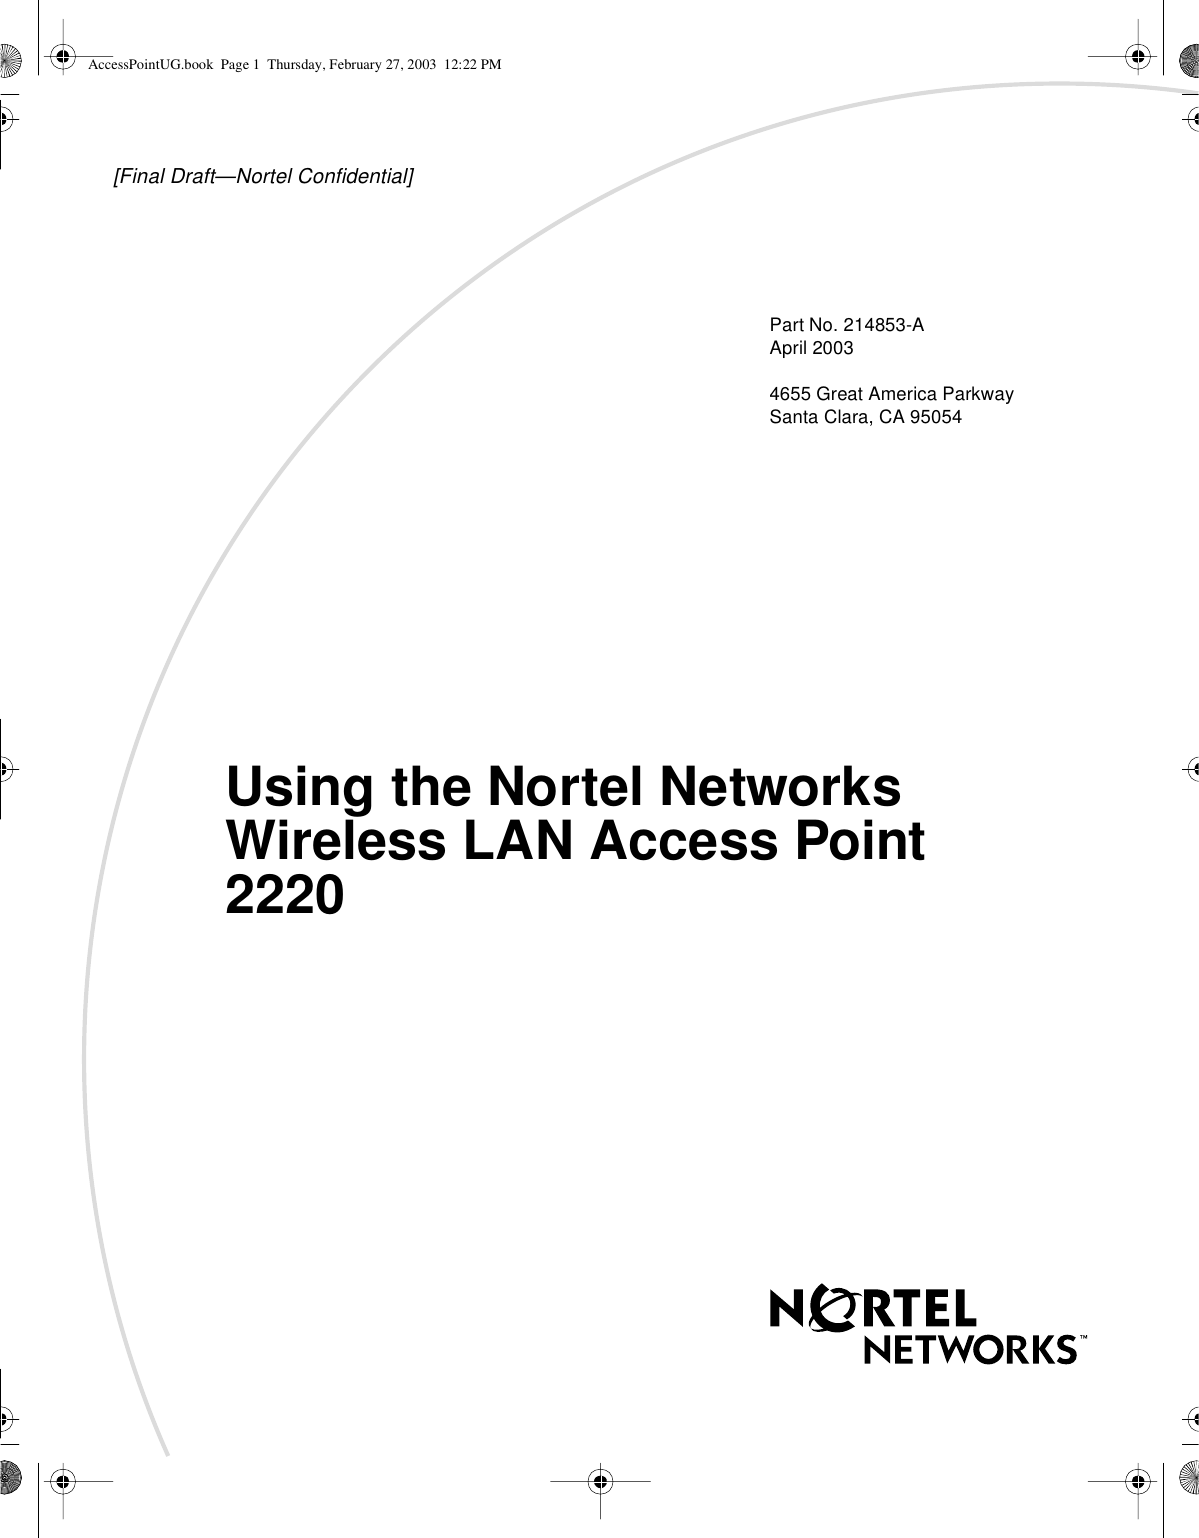 [Final Draft—Nortel Confidential]Part No. 214853-AApril 20034655 Great America ParkwaySanta Clara, CA 95054Using the Nortel NetworksWireless LAN Access Point2220AccessPointUG.book Page 1 Thursday, February 27, 2003 12:22 PM